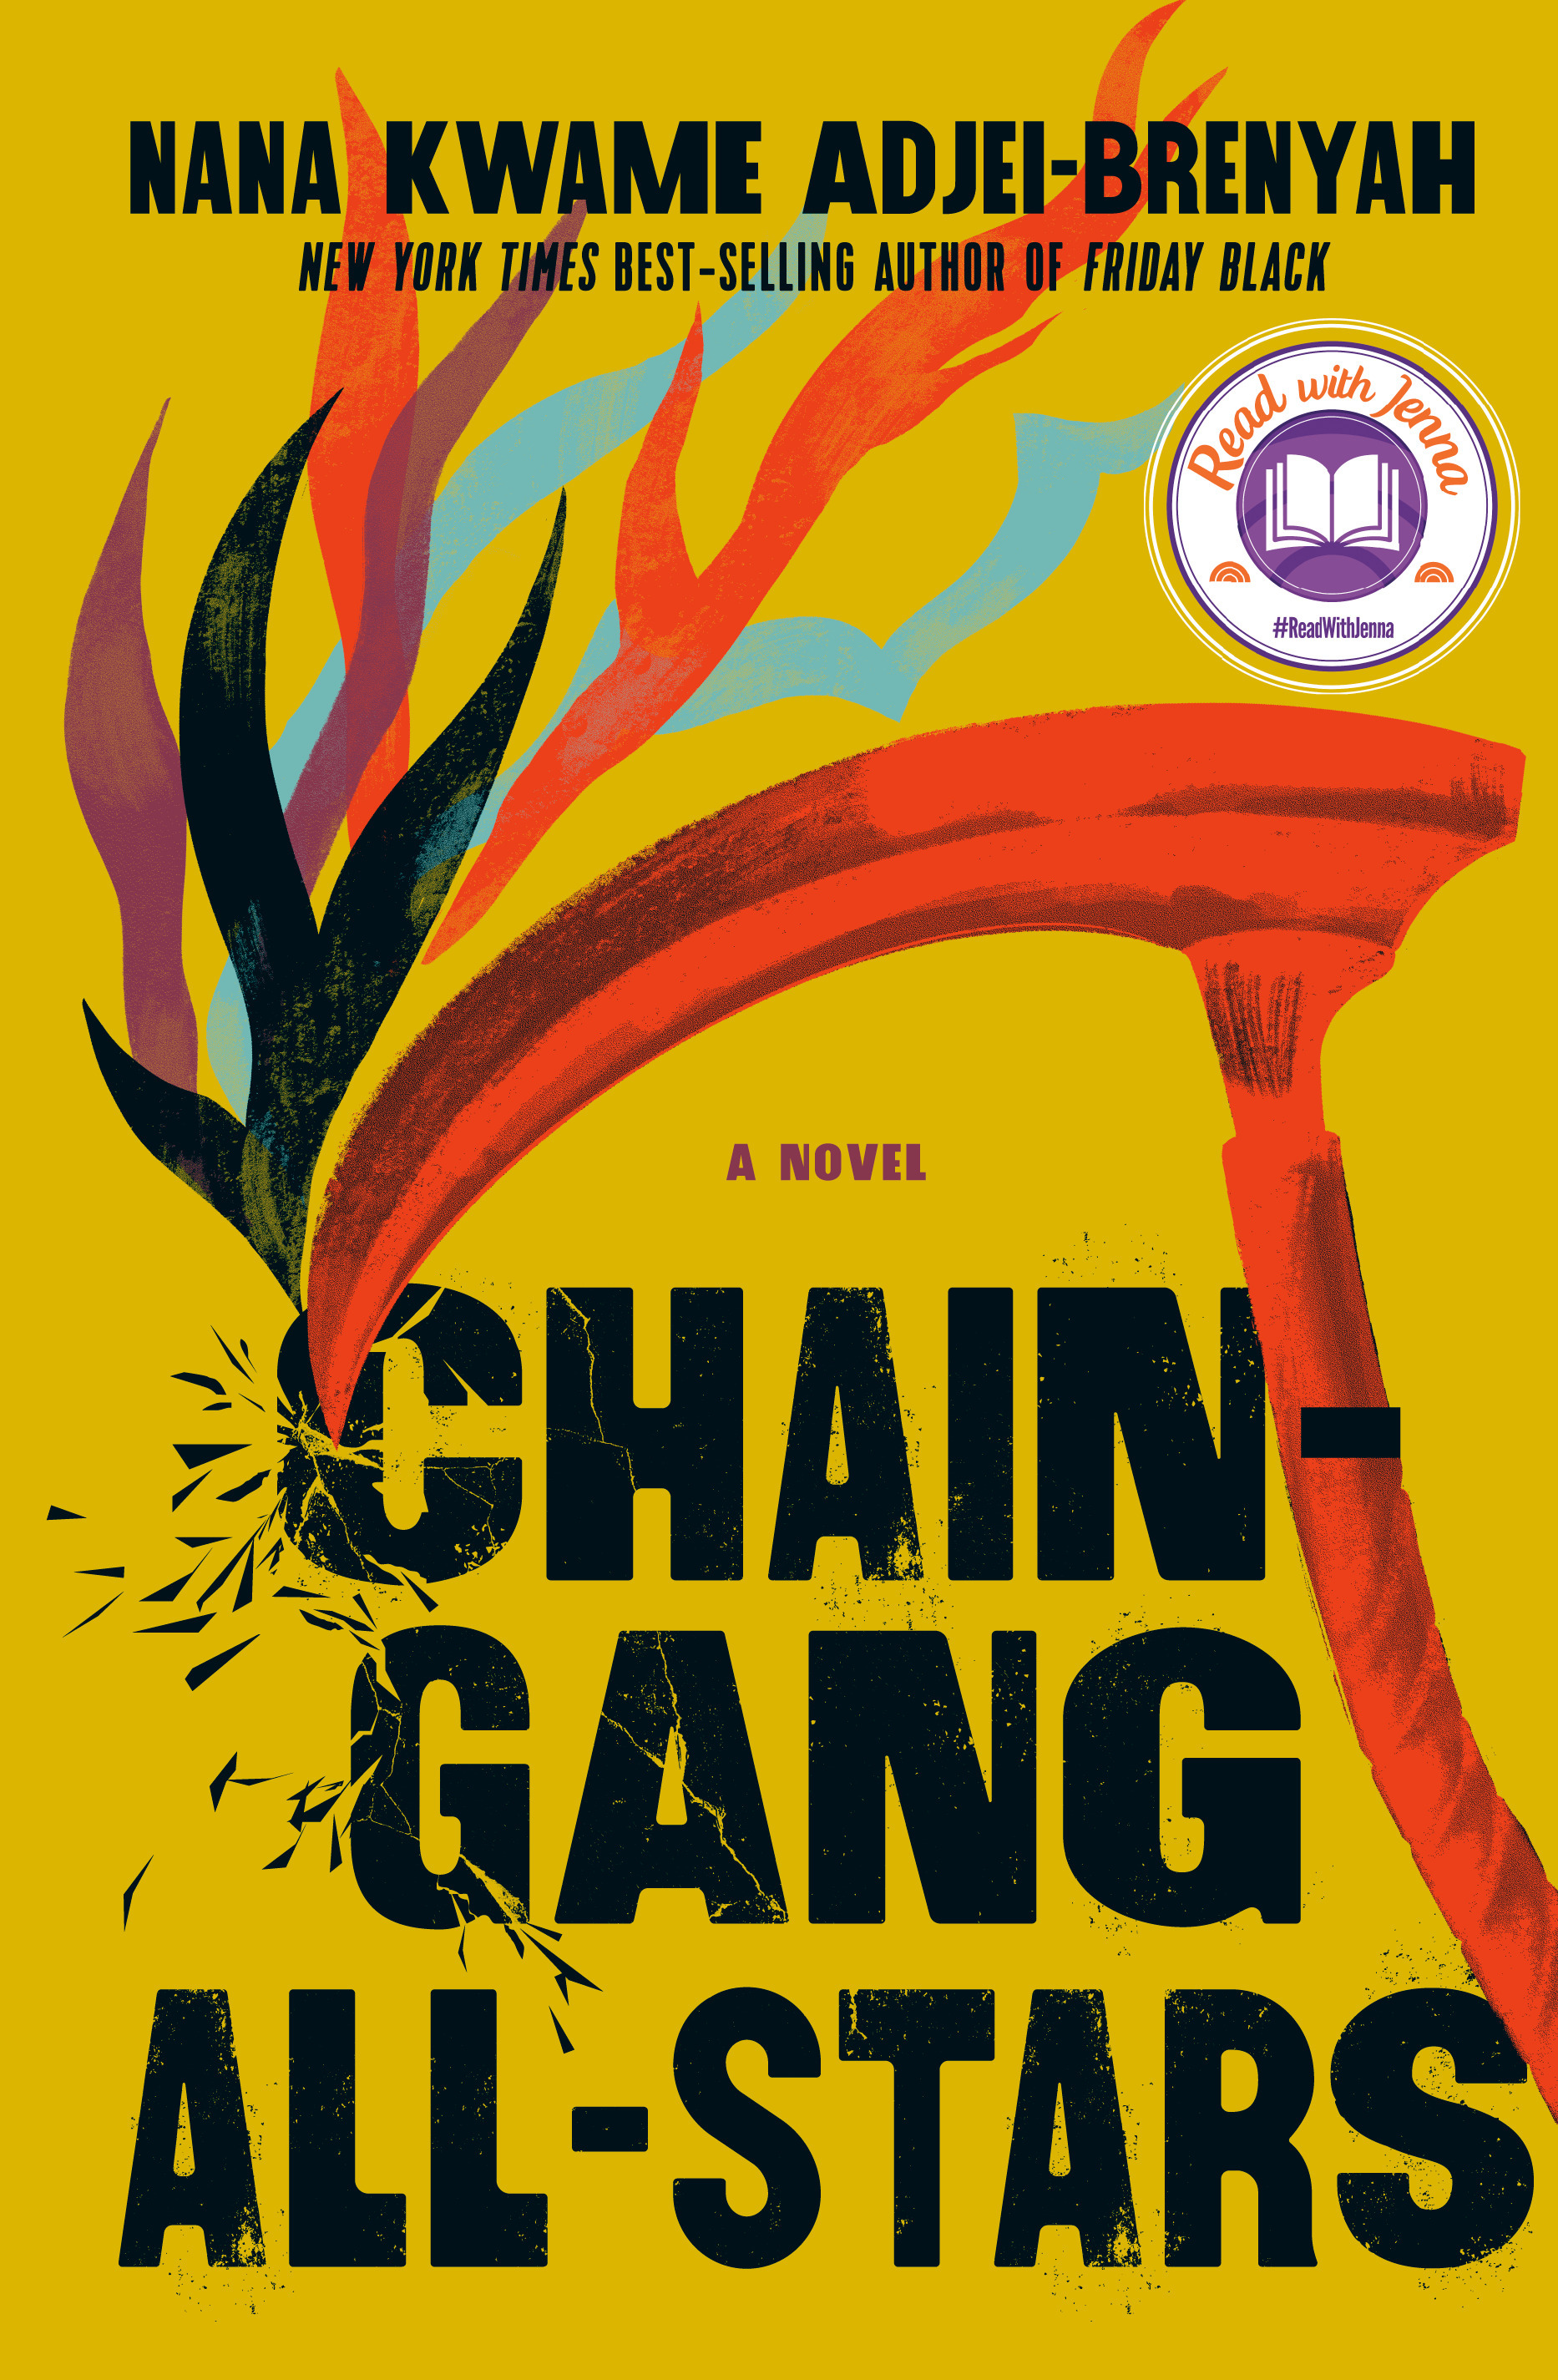 Image for "Chain Gang All Stars"